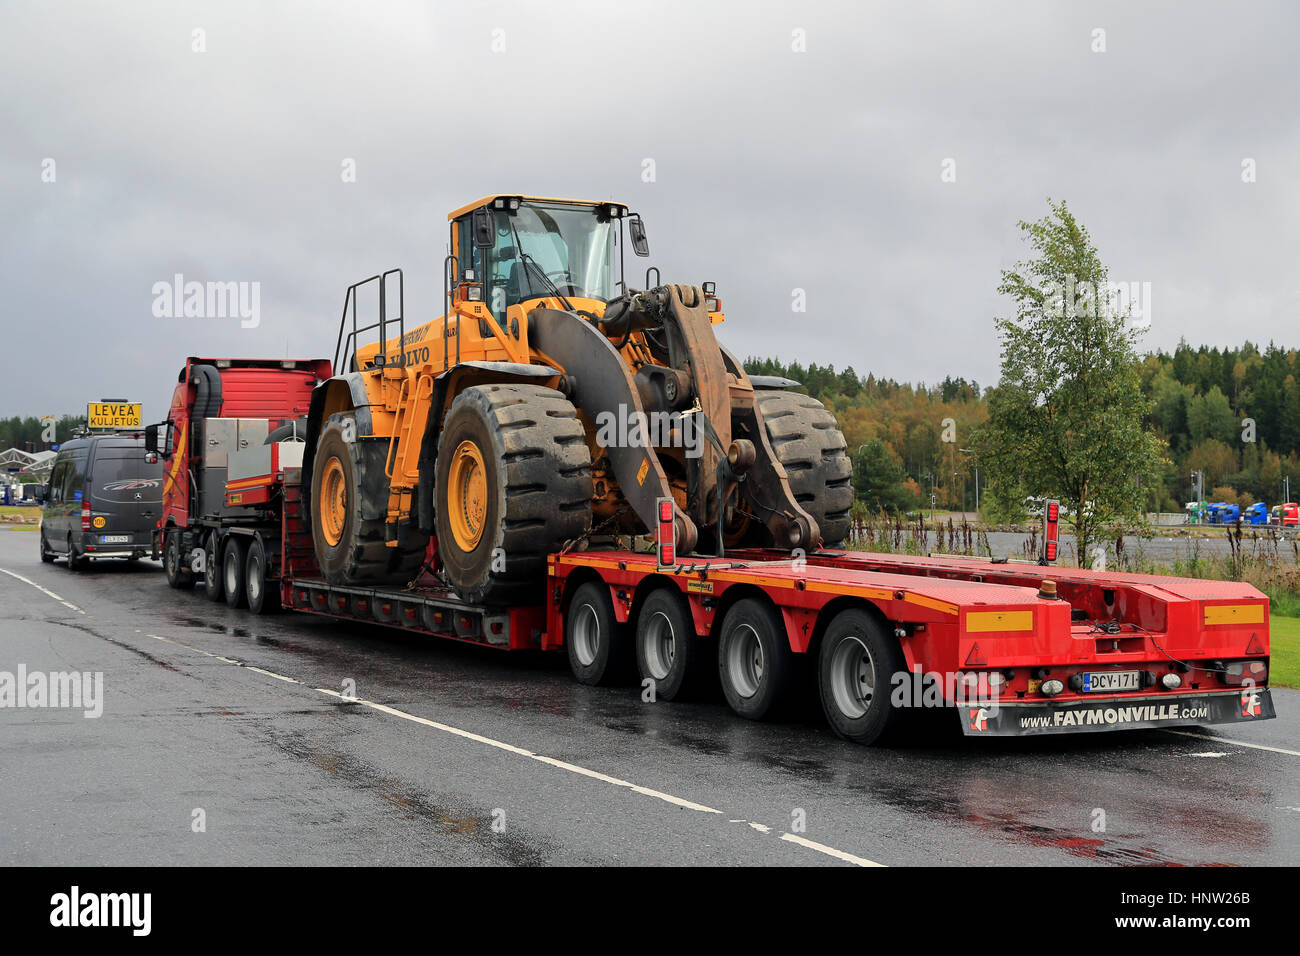 FORSSA, FINLAND - SEPTEMBER 4, 2016: Volvo FH12 semi trailer is ready to transport a large Volvo wheel loader on Faymontville gooseneck trailer as wid Stock Photo